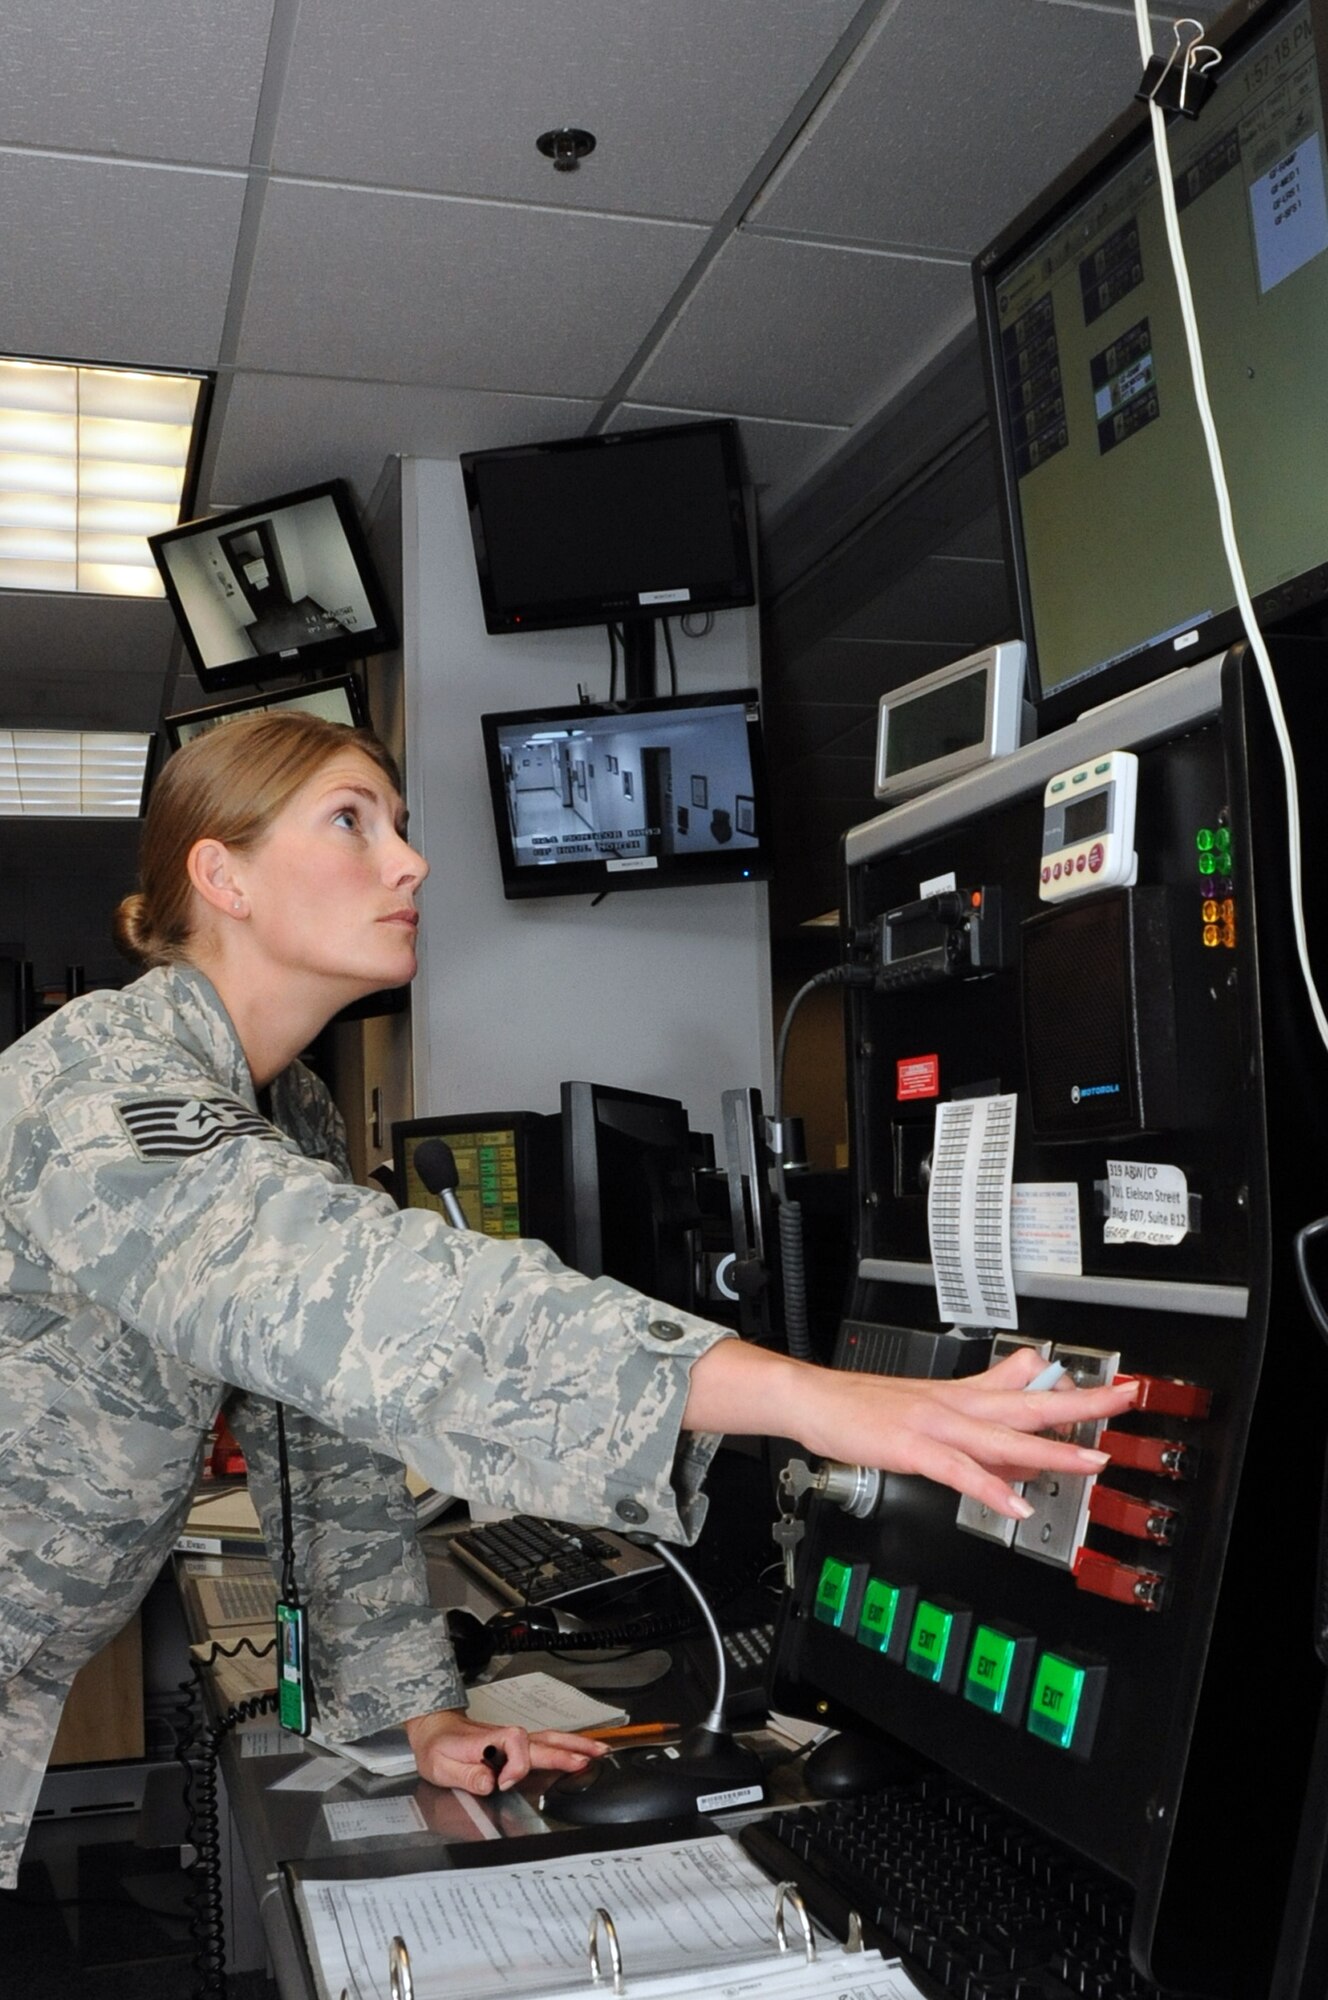 Tech. Sgt. Krystal French, 319th Air Base Wing NCO in charge of command post operations, speaks to the base populace over the Land Mass Radio trunk system in the command post on Grand Forks Air Force Base, N.D., September 4, 2014. French was selected as the base's Warrior of the Week for the first week of September 2014. (U.S. Air Force photo/Staff Sgt. David Dobrydney)